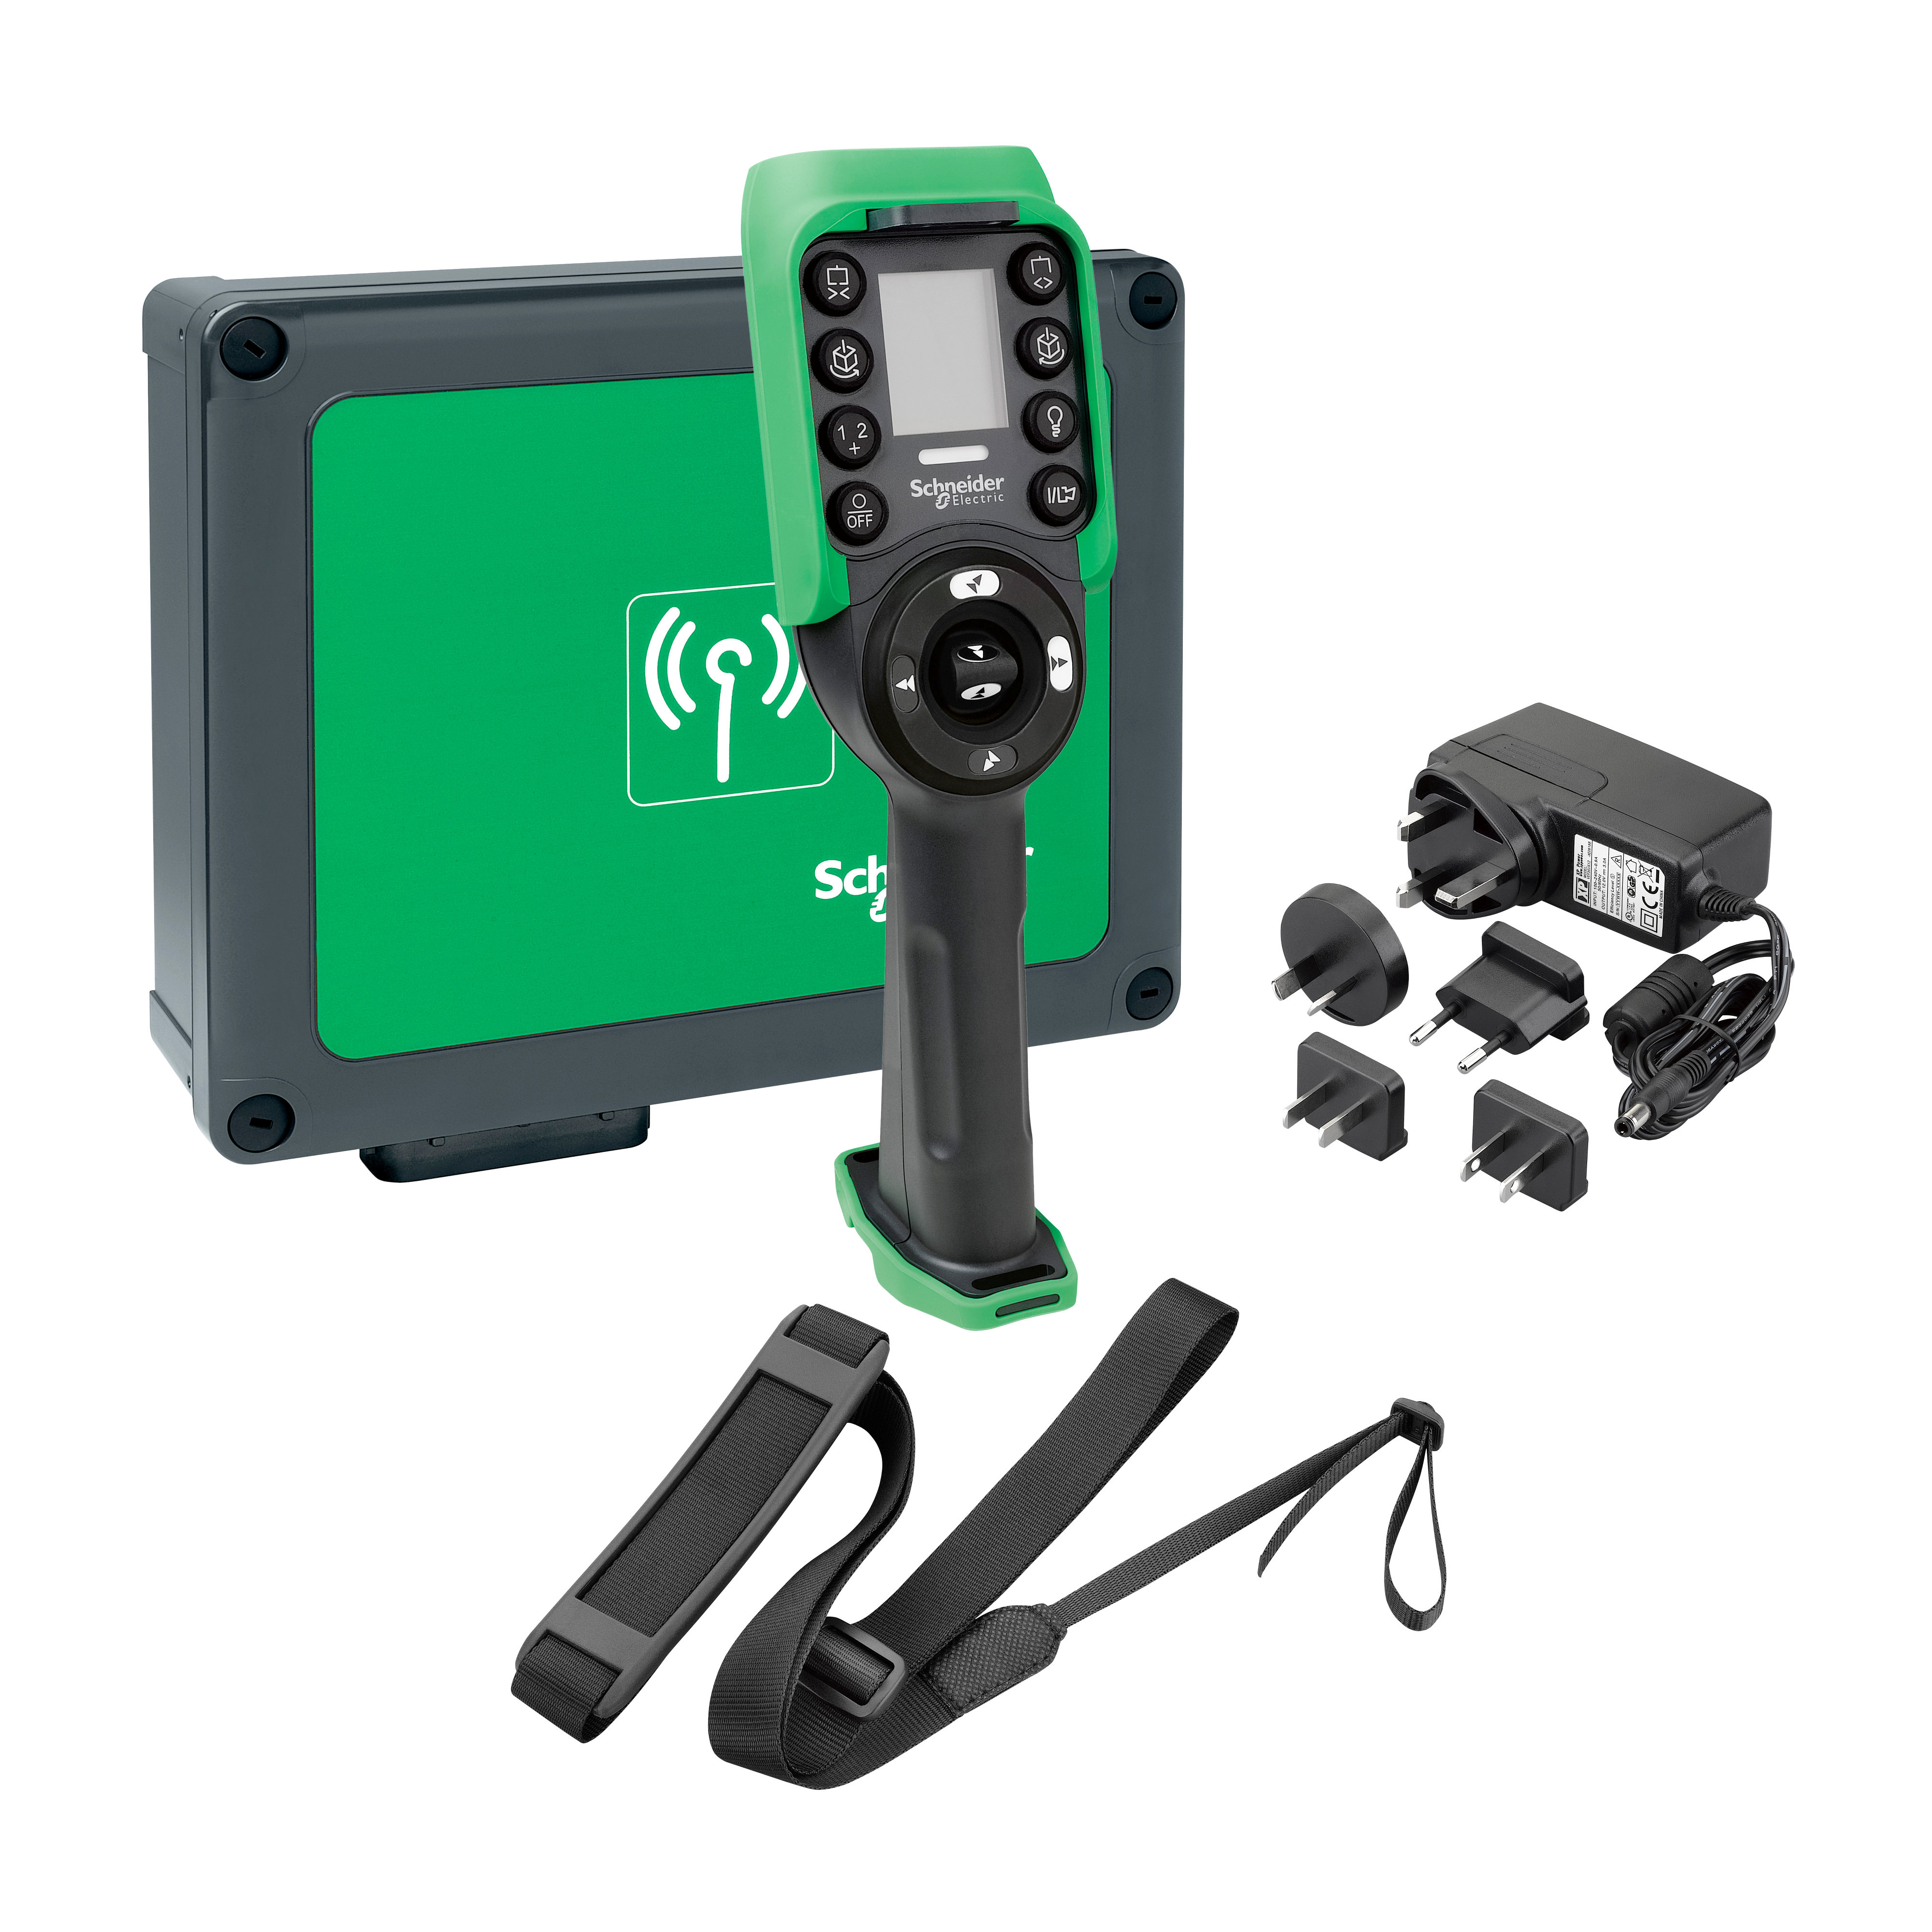 Harmony eXLhoist, standard, XARS12D18H system with charger, shoulder belt, cable USB/RJ45 and config software